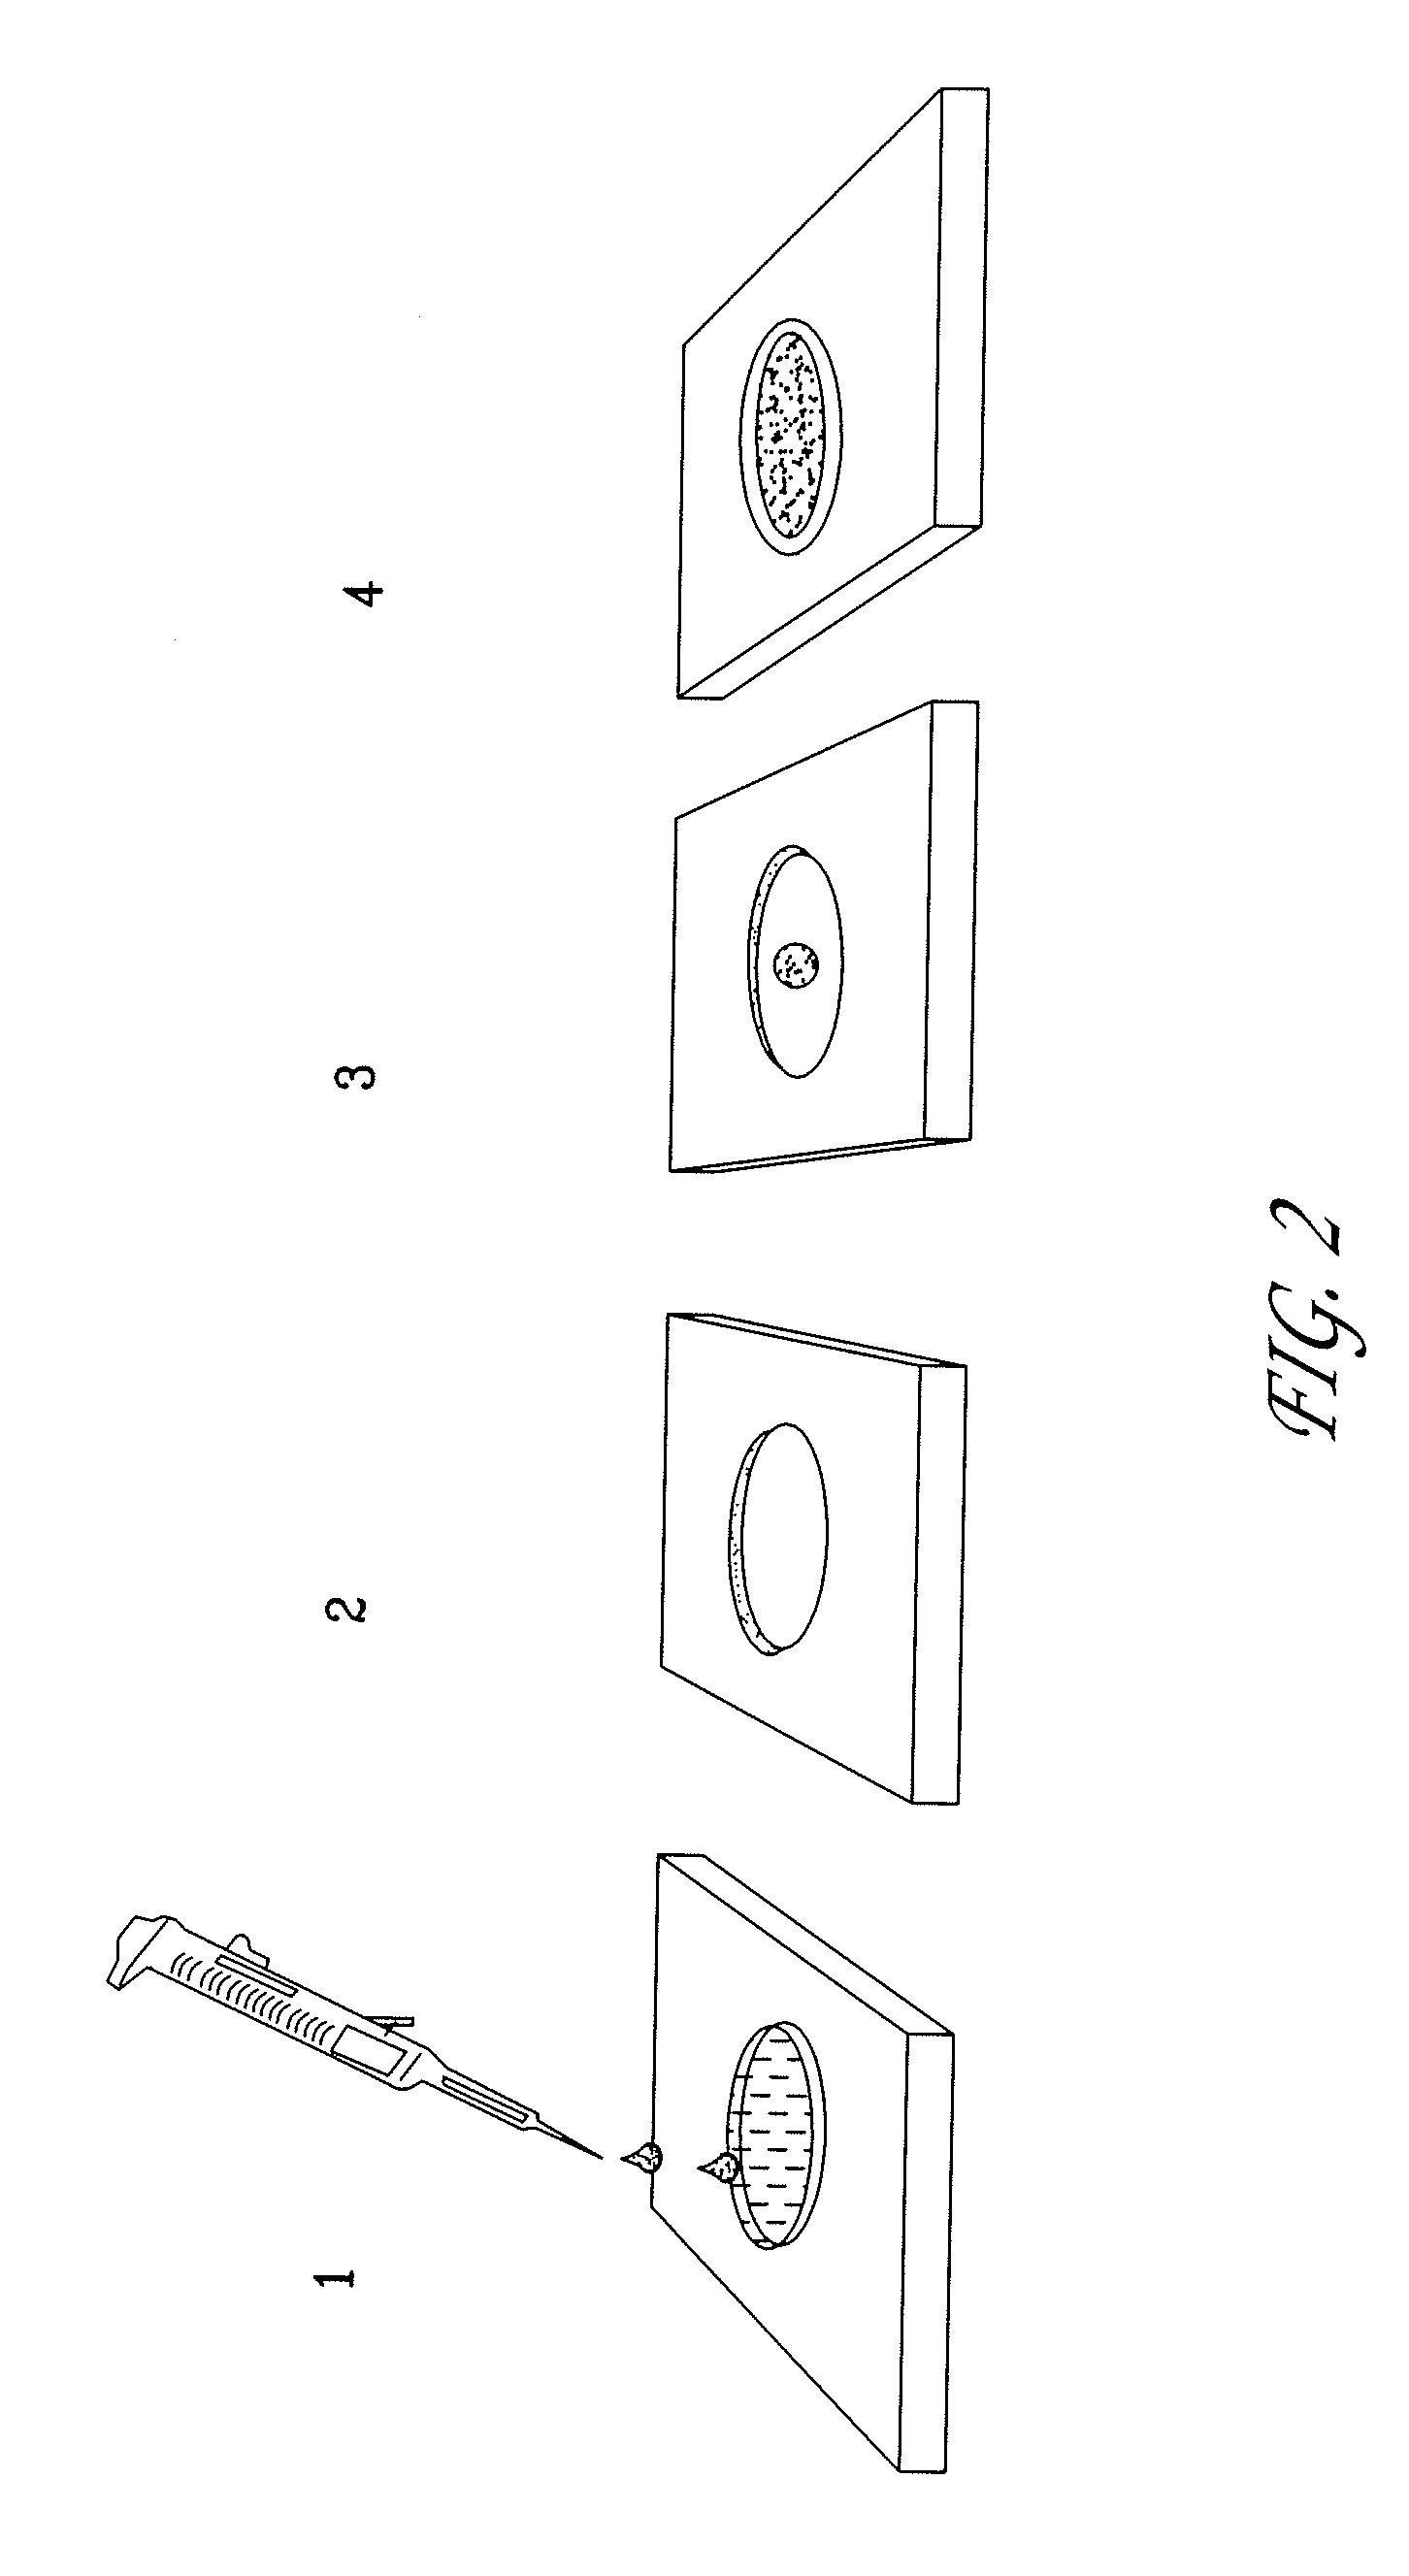 Reaction chamber having pre-stored reagents